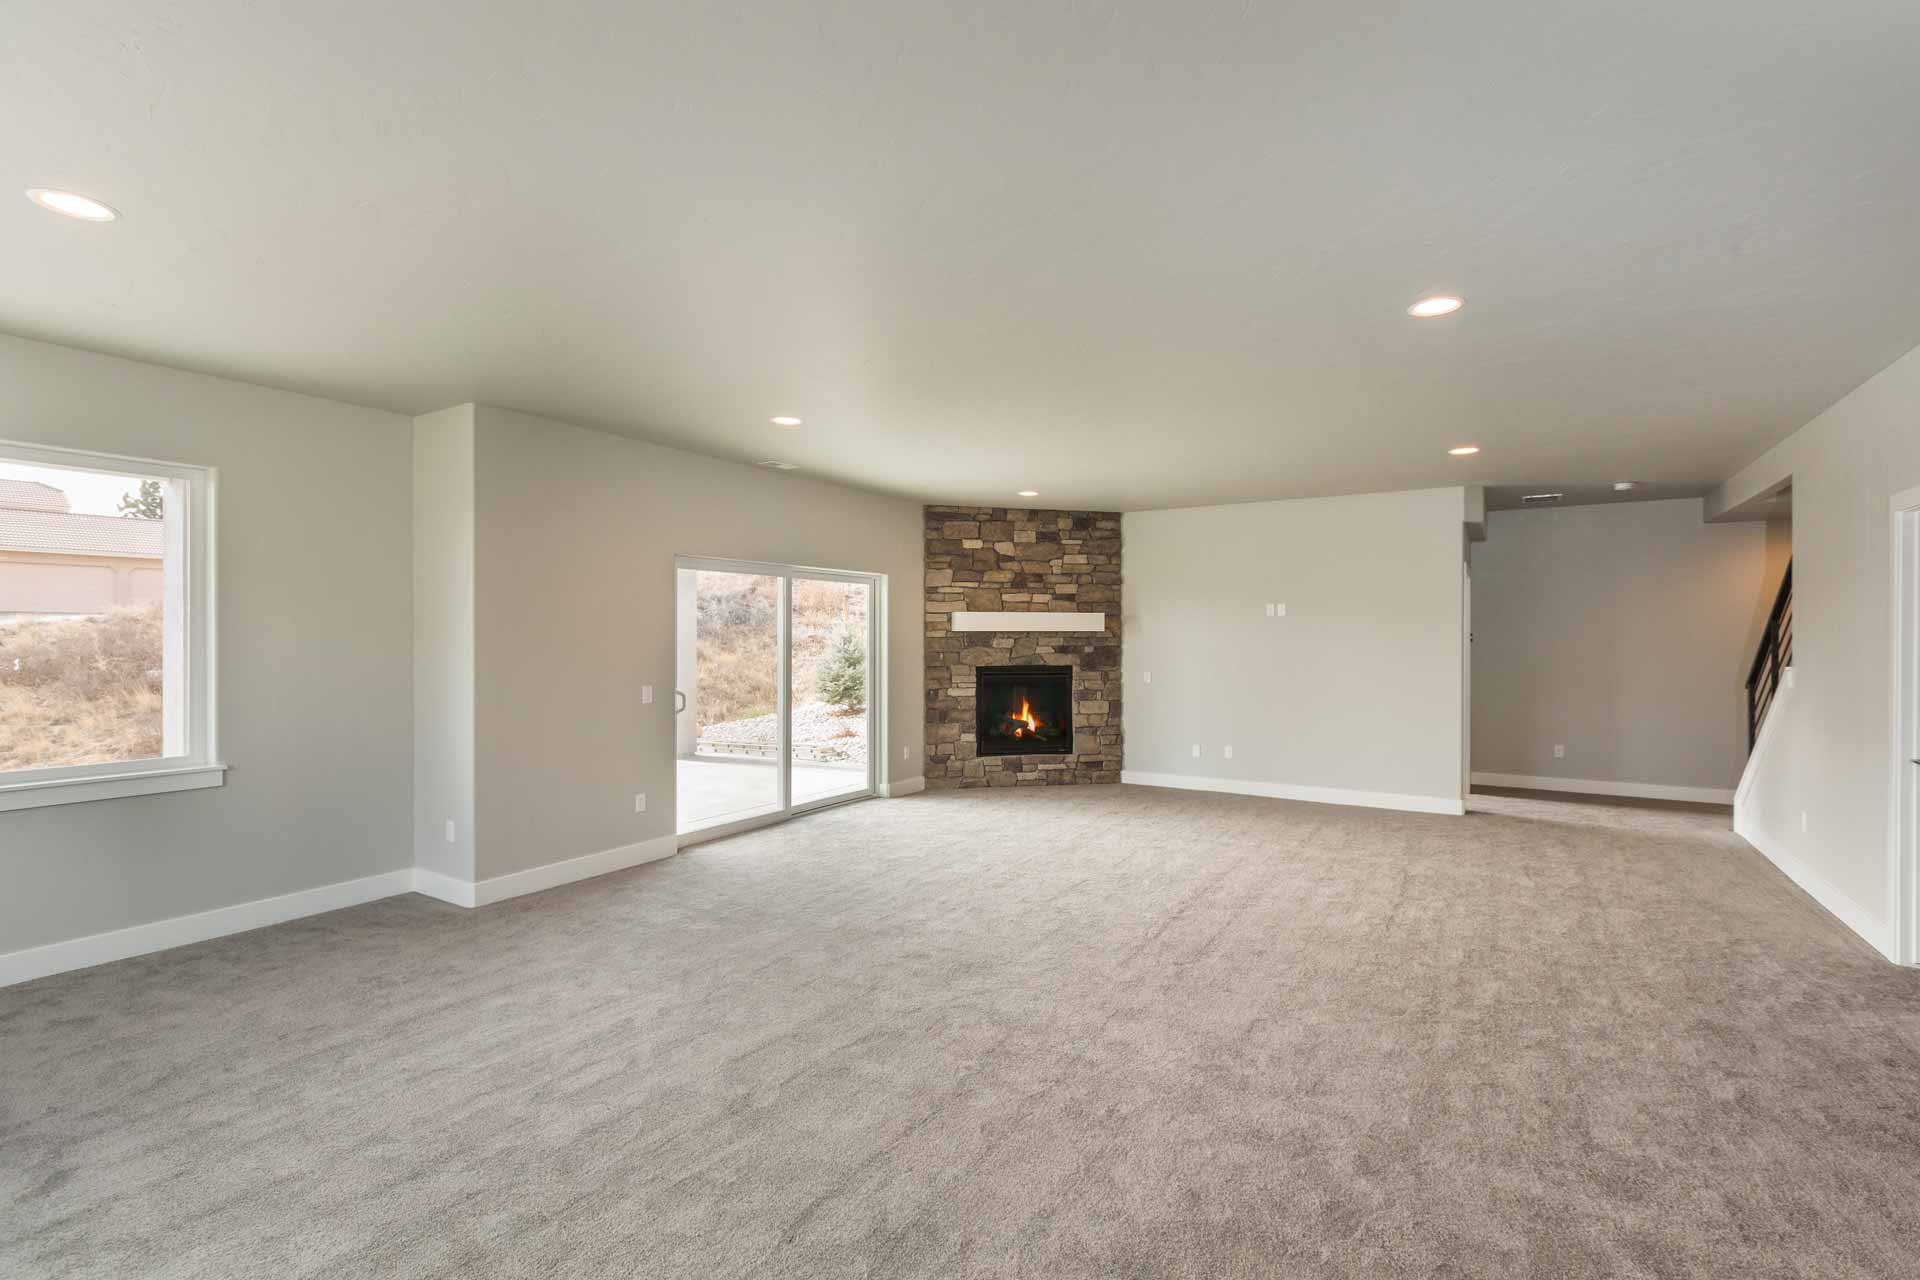 Finished basement with carpeting and fireplace. New construction.